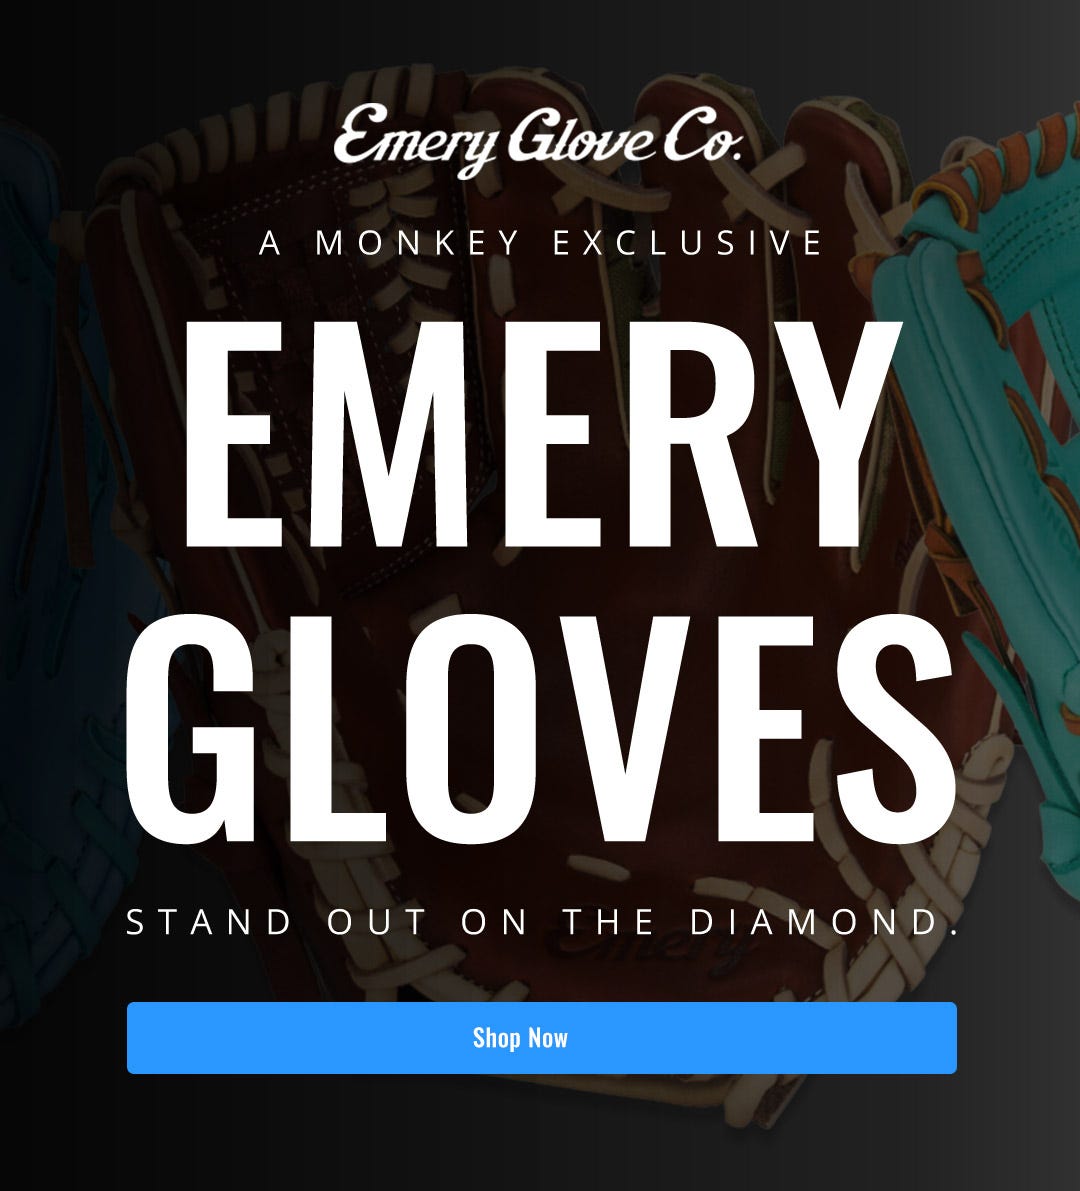 Emery Baseball Gloves: Crafted with precision and passion